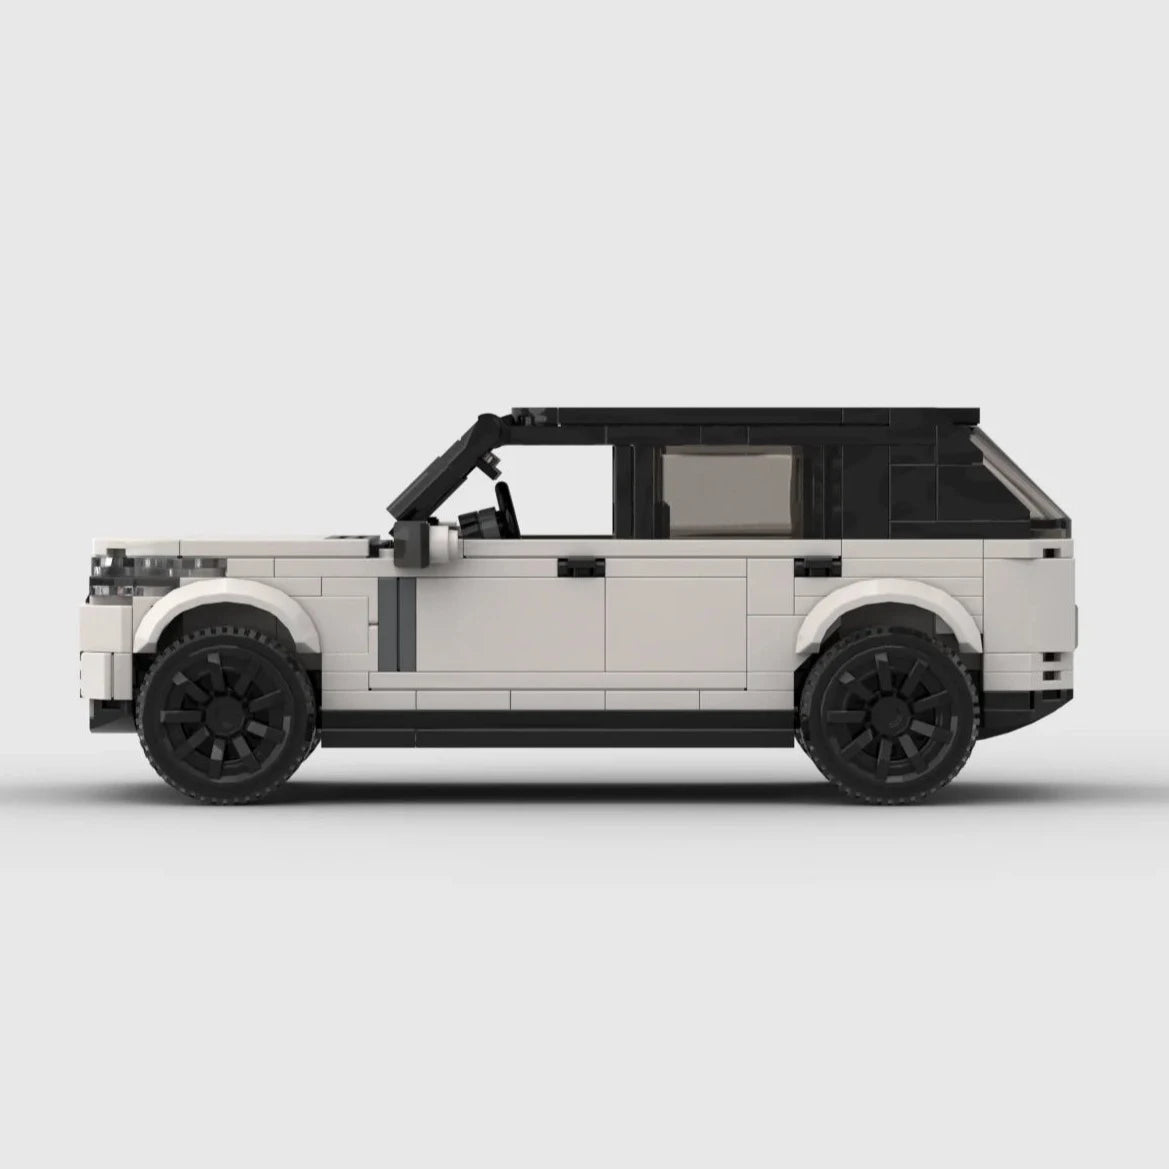 Land Rover Range Rover made from lego building blocks